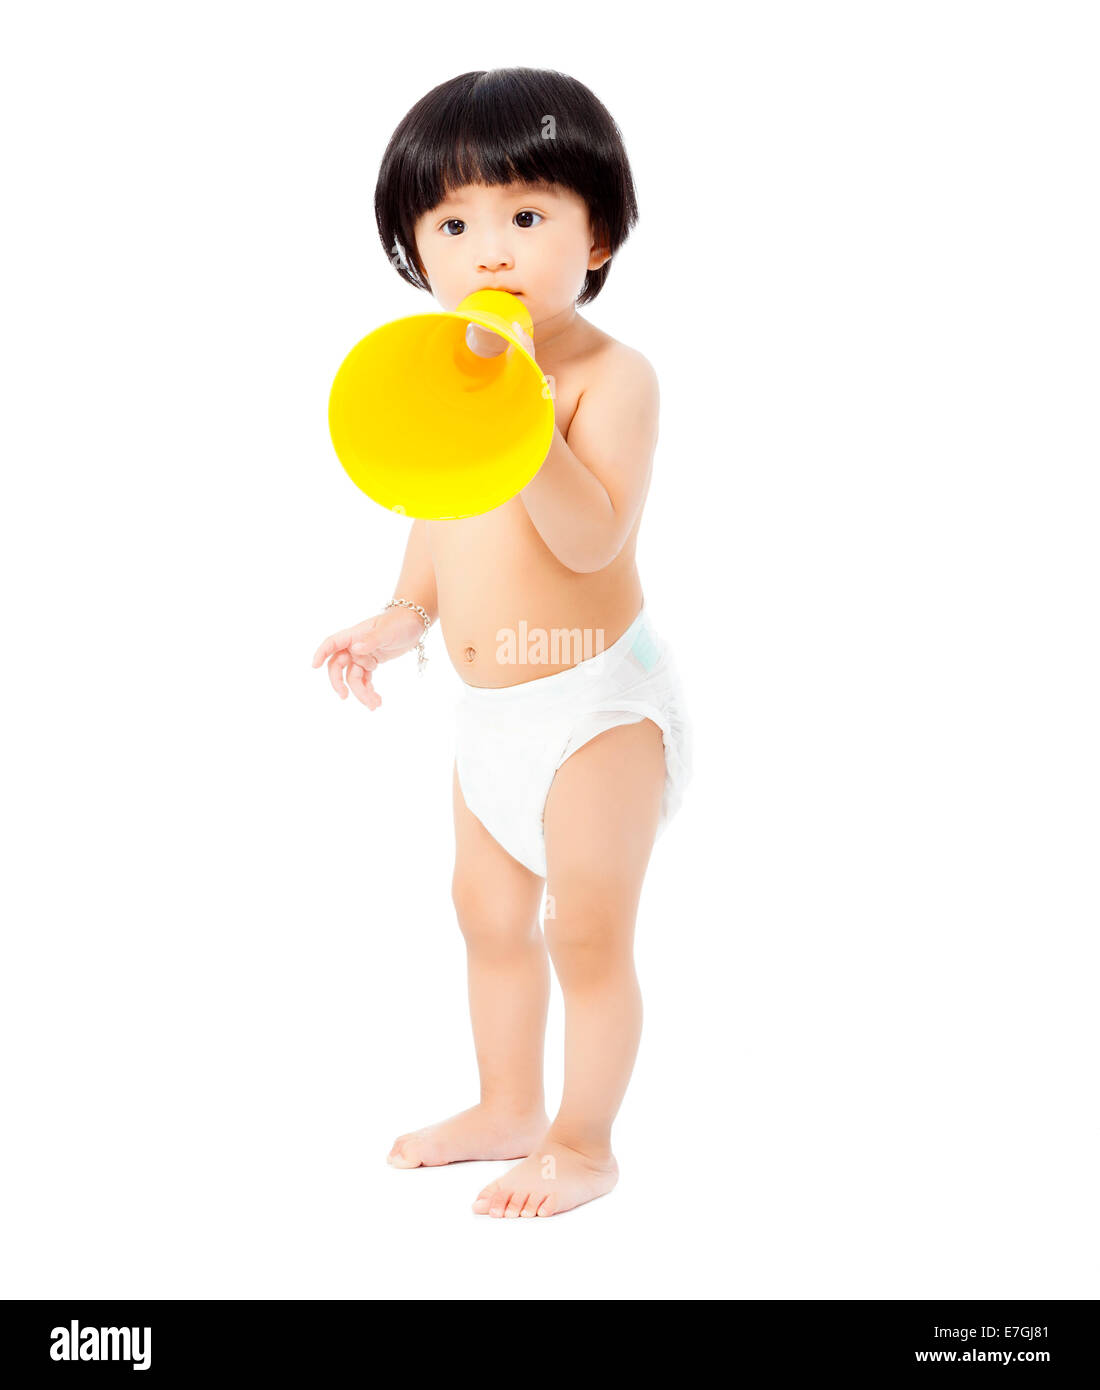 cute baby girl standing and holding a megaphone. isolated on white background Stock Photo